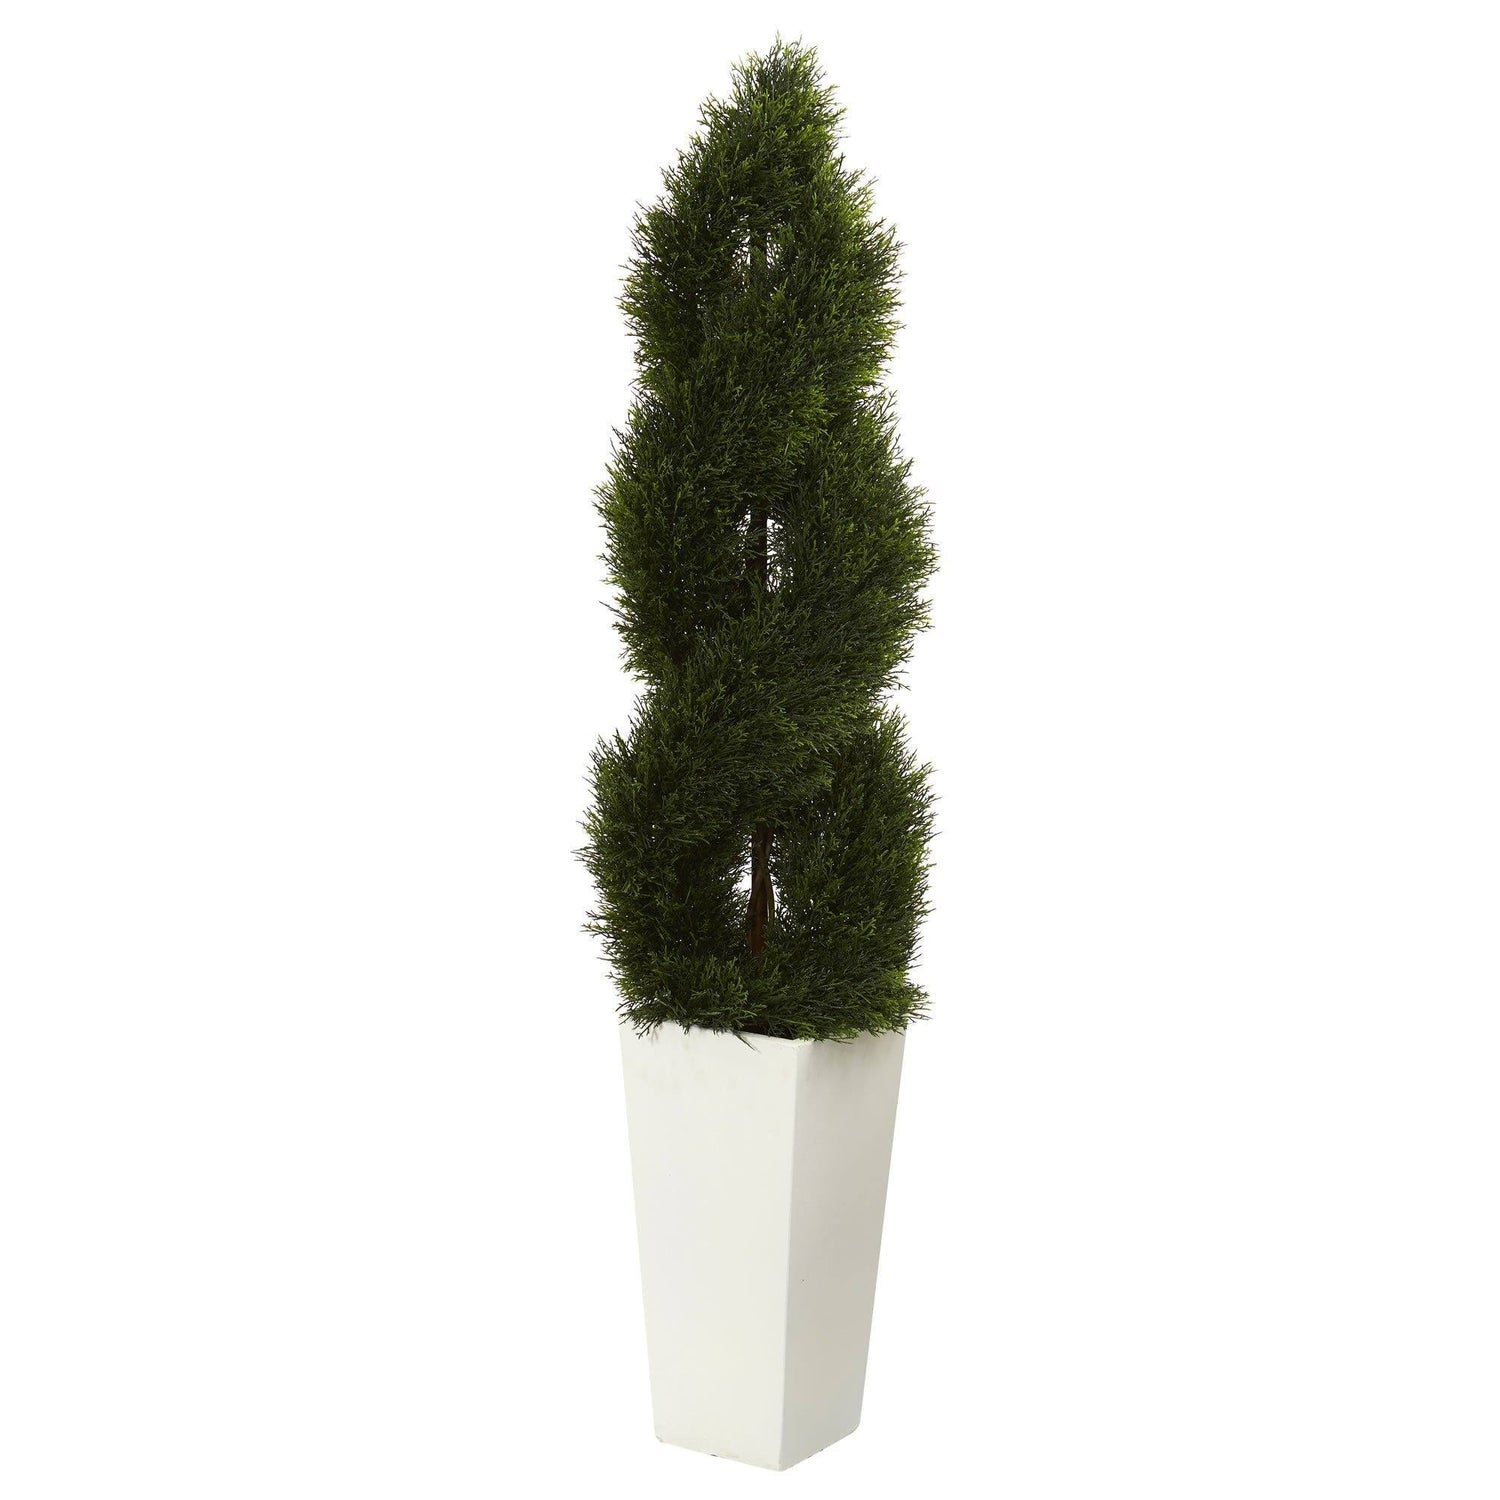 5.5’ Double Cypress Spiral Topiary Artificial Tree in White Planter (Indoor/Outdoor)